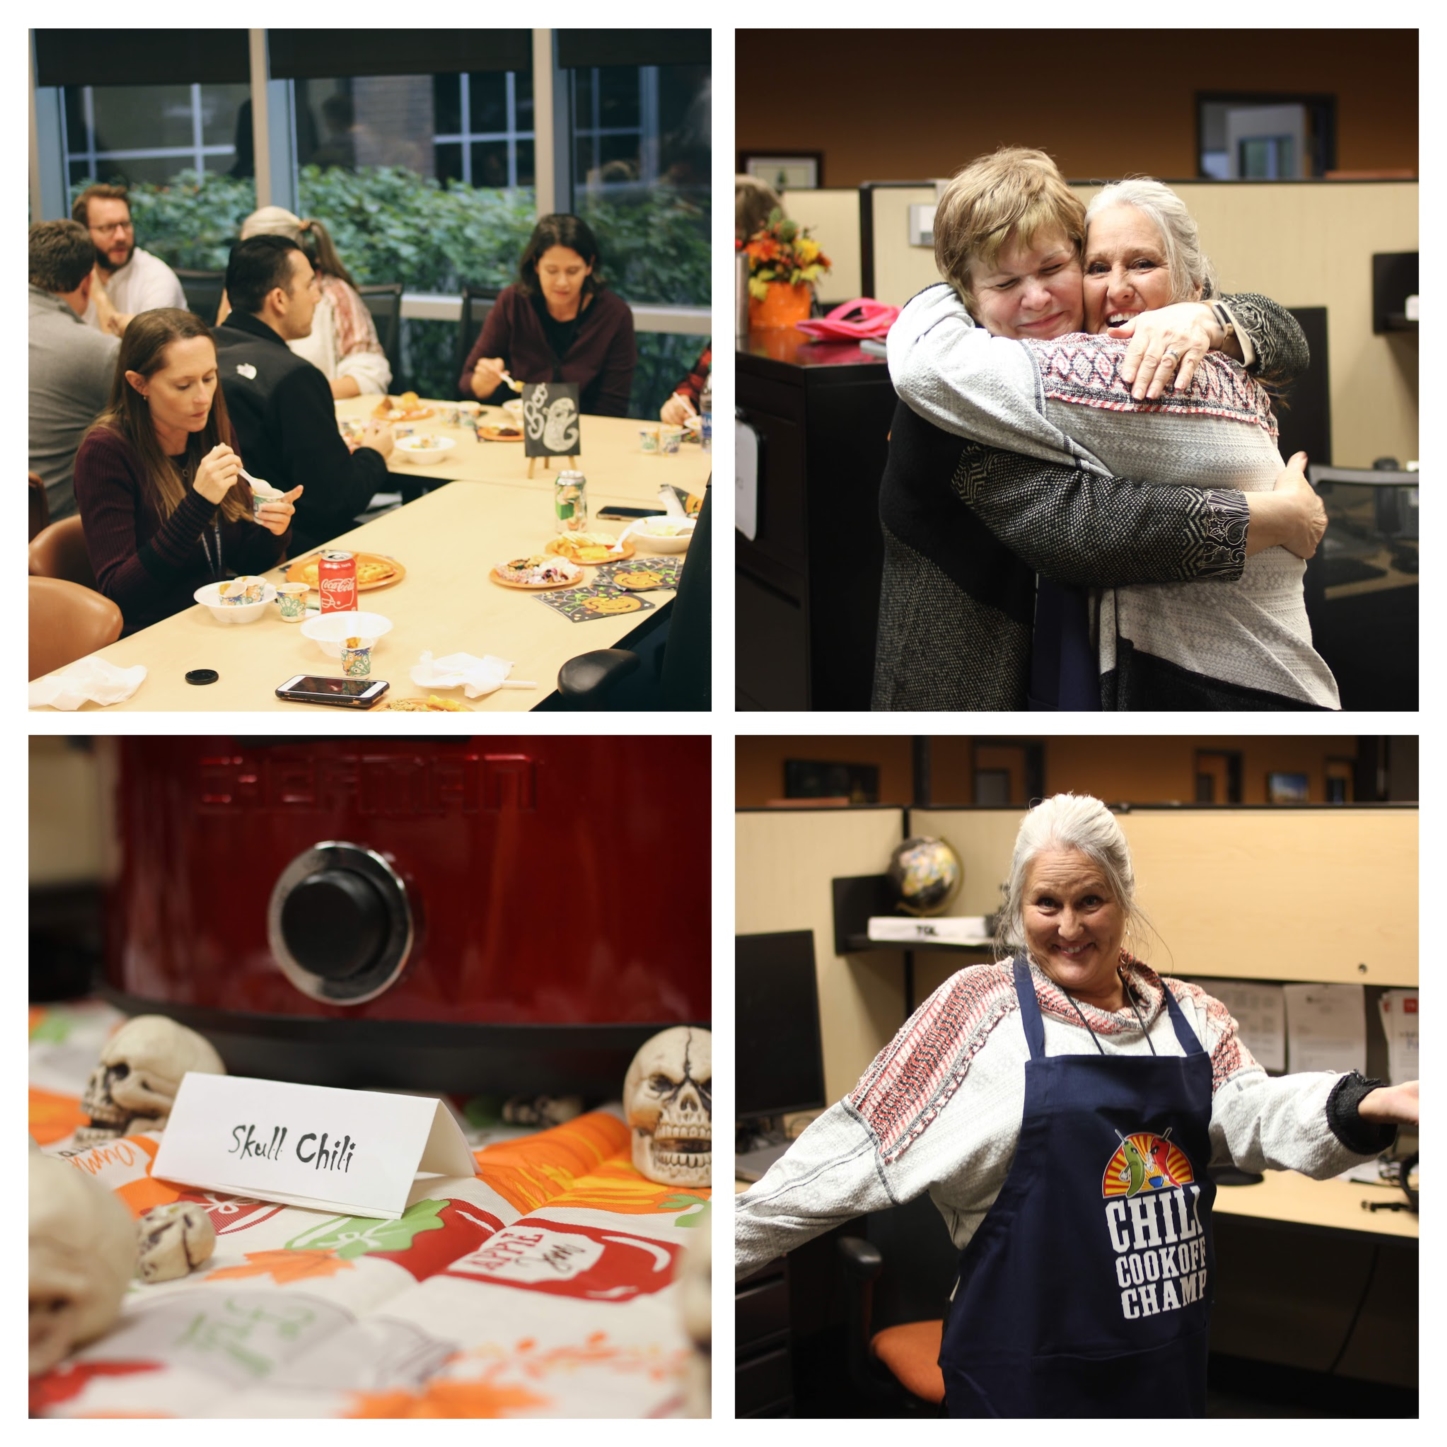 Snapshots from the Bureau's Halloween Chili Cook-off